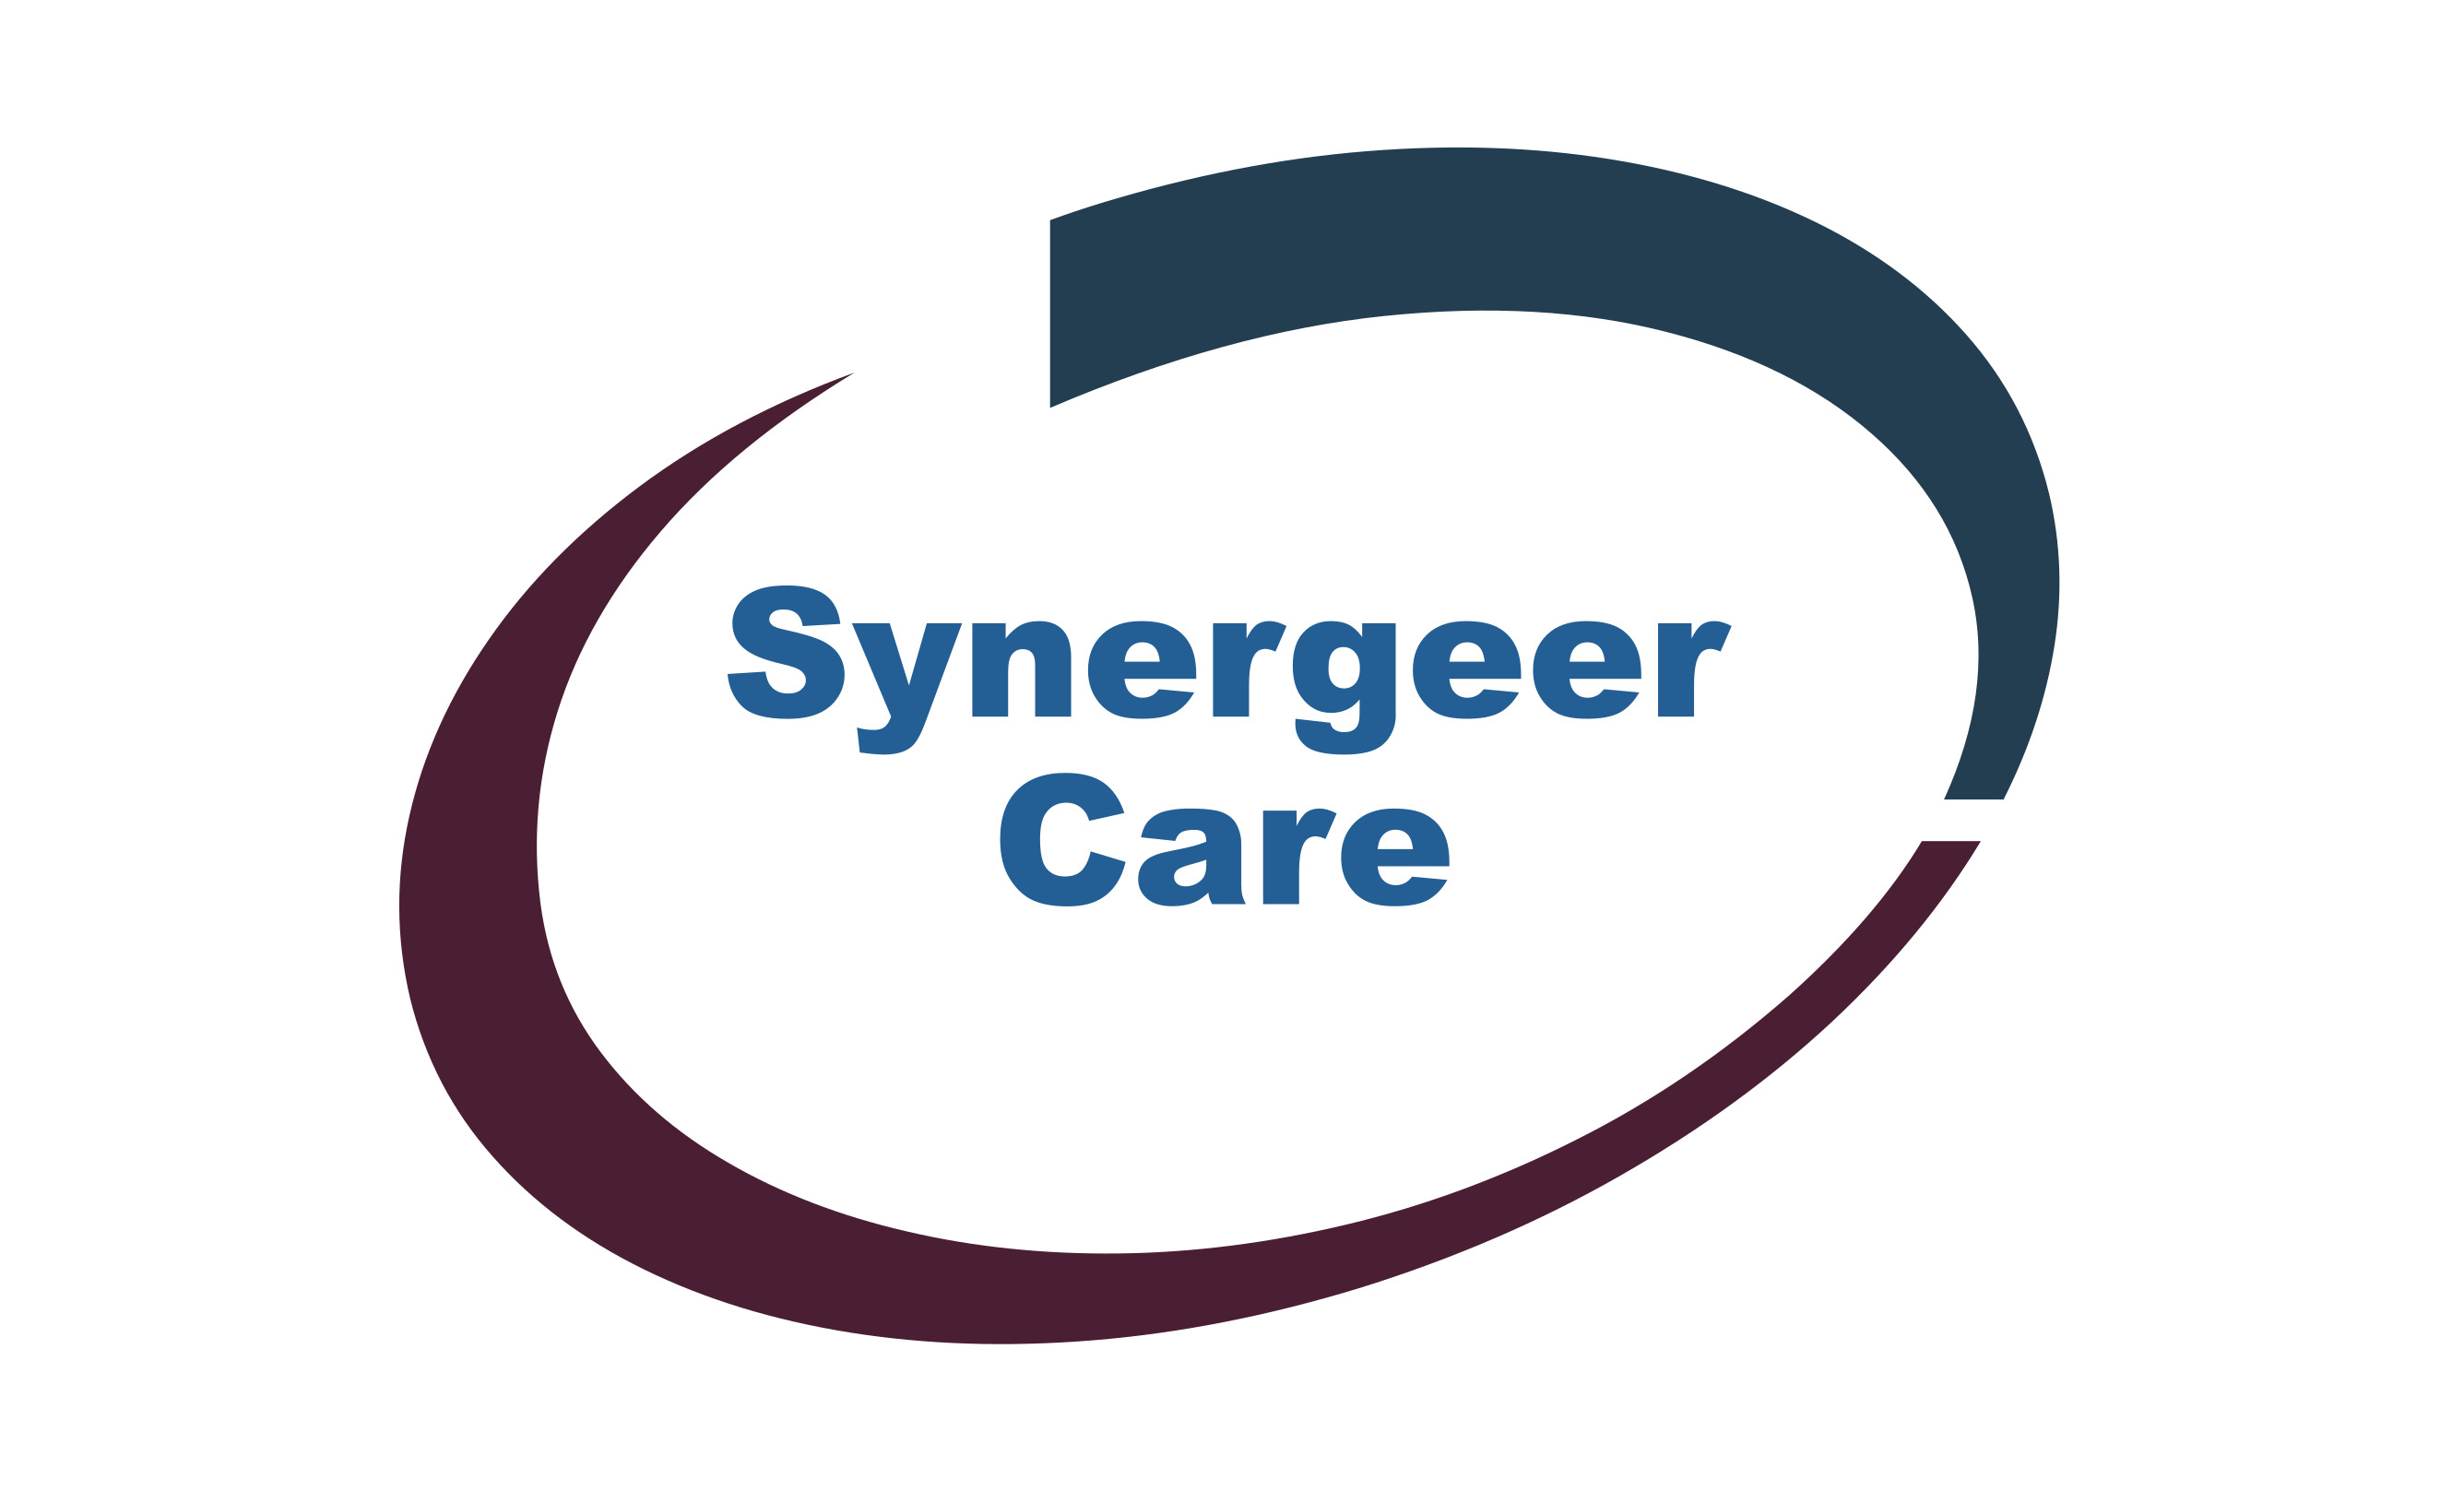 Synergeer Care